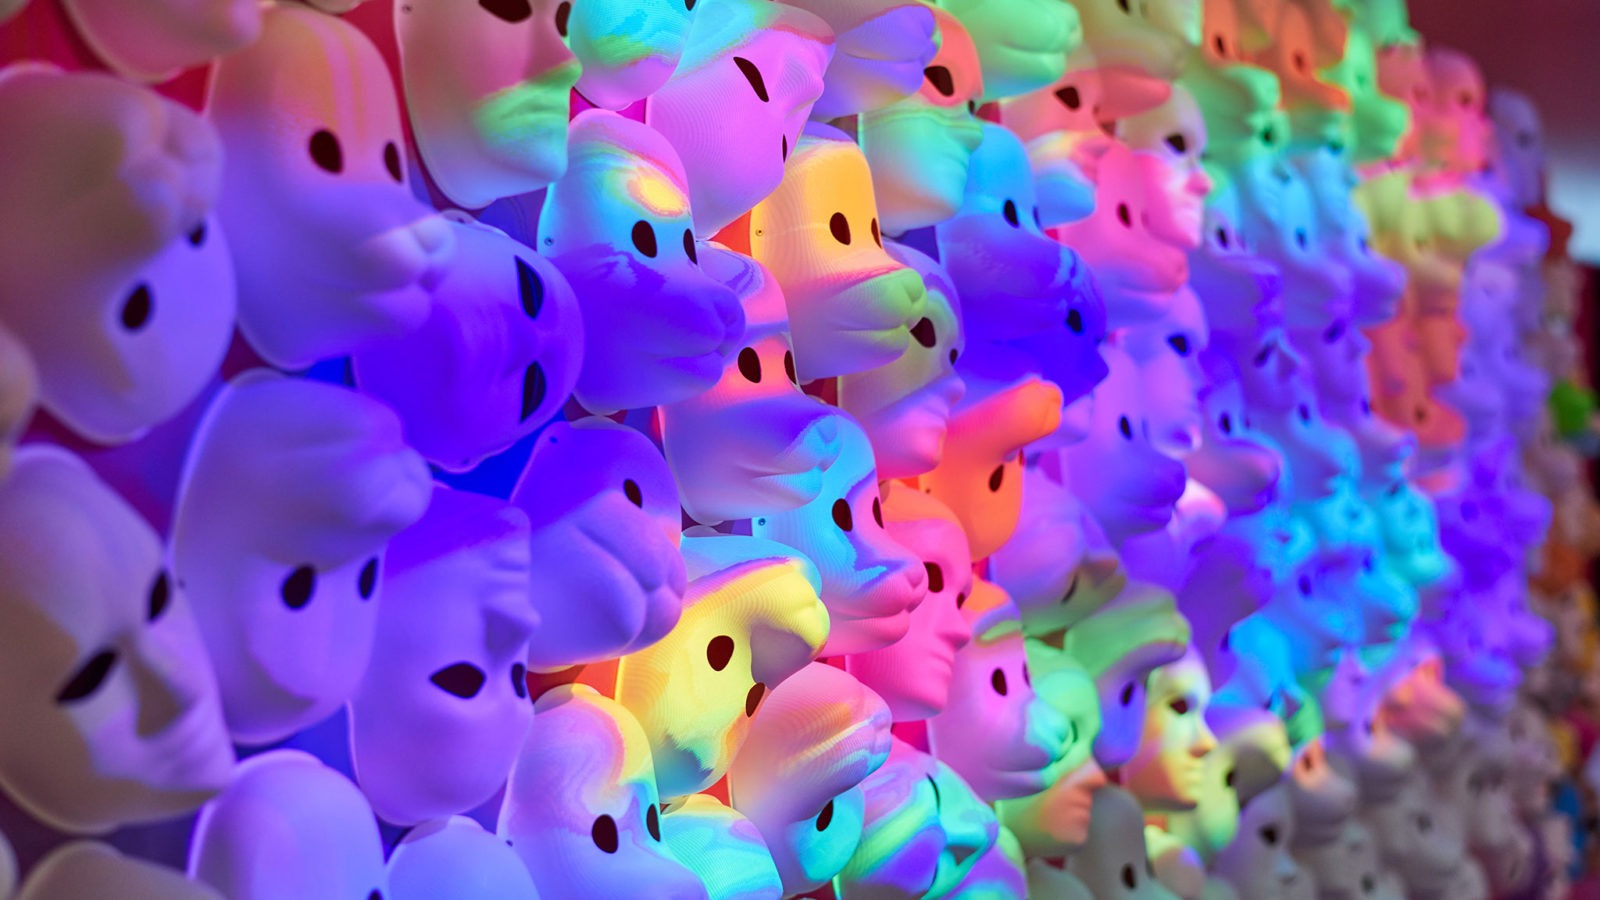 Face masks for play covering a large wall completely, bathed in multicoloured, fluid light.